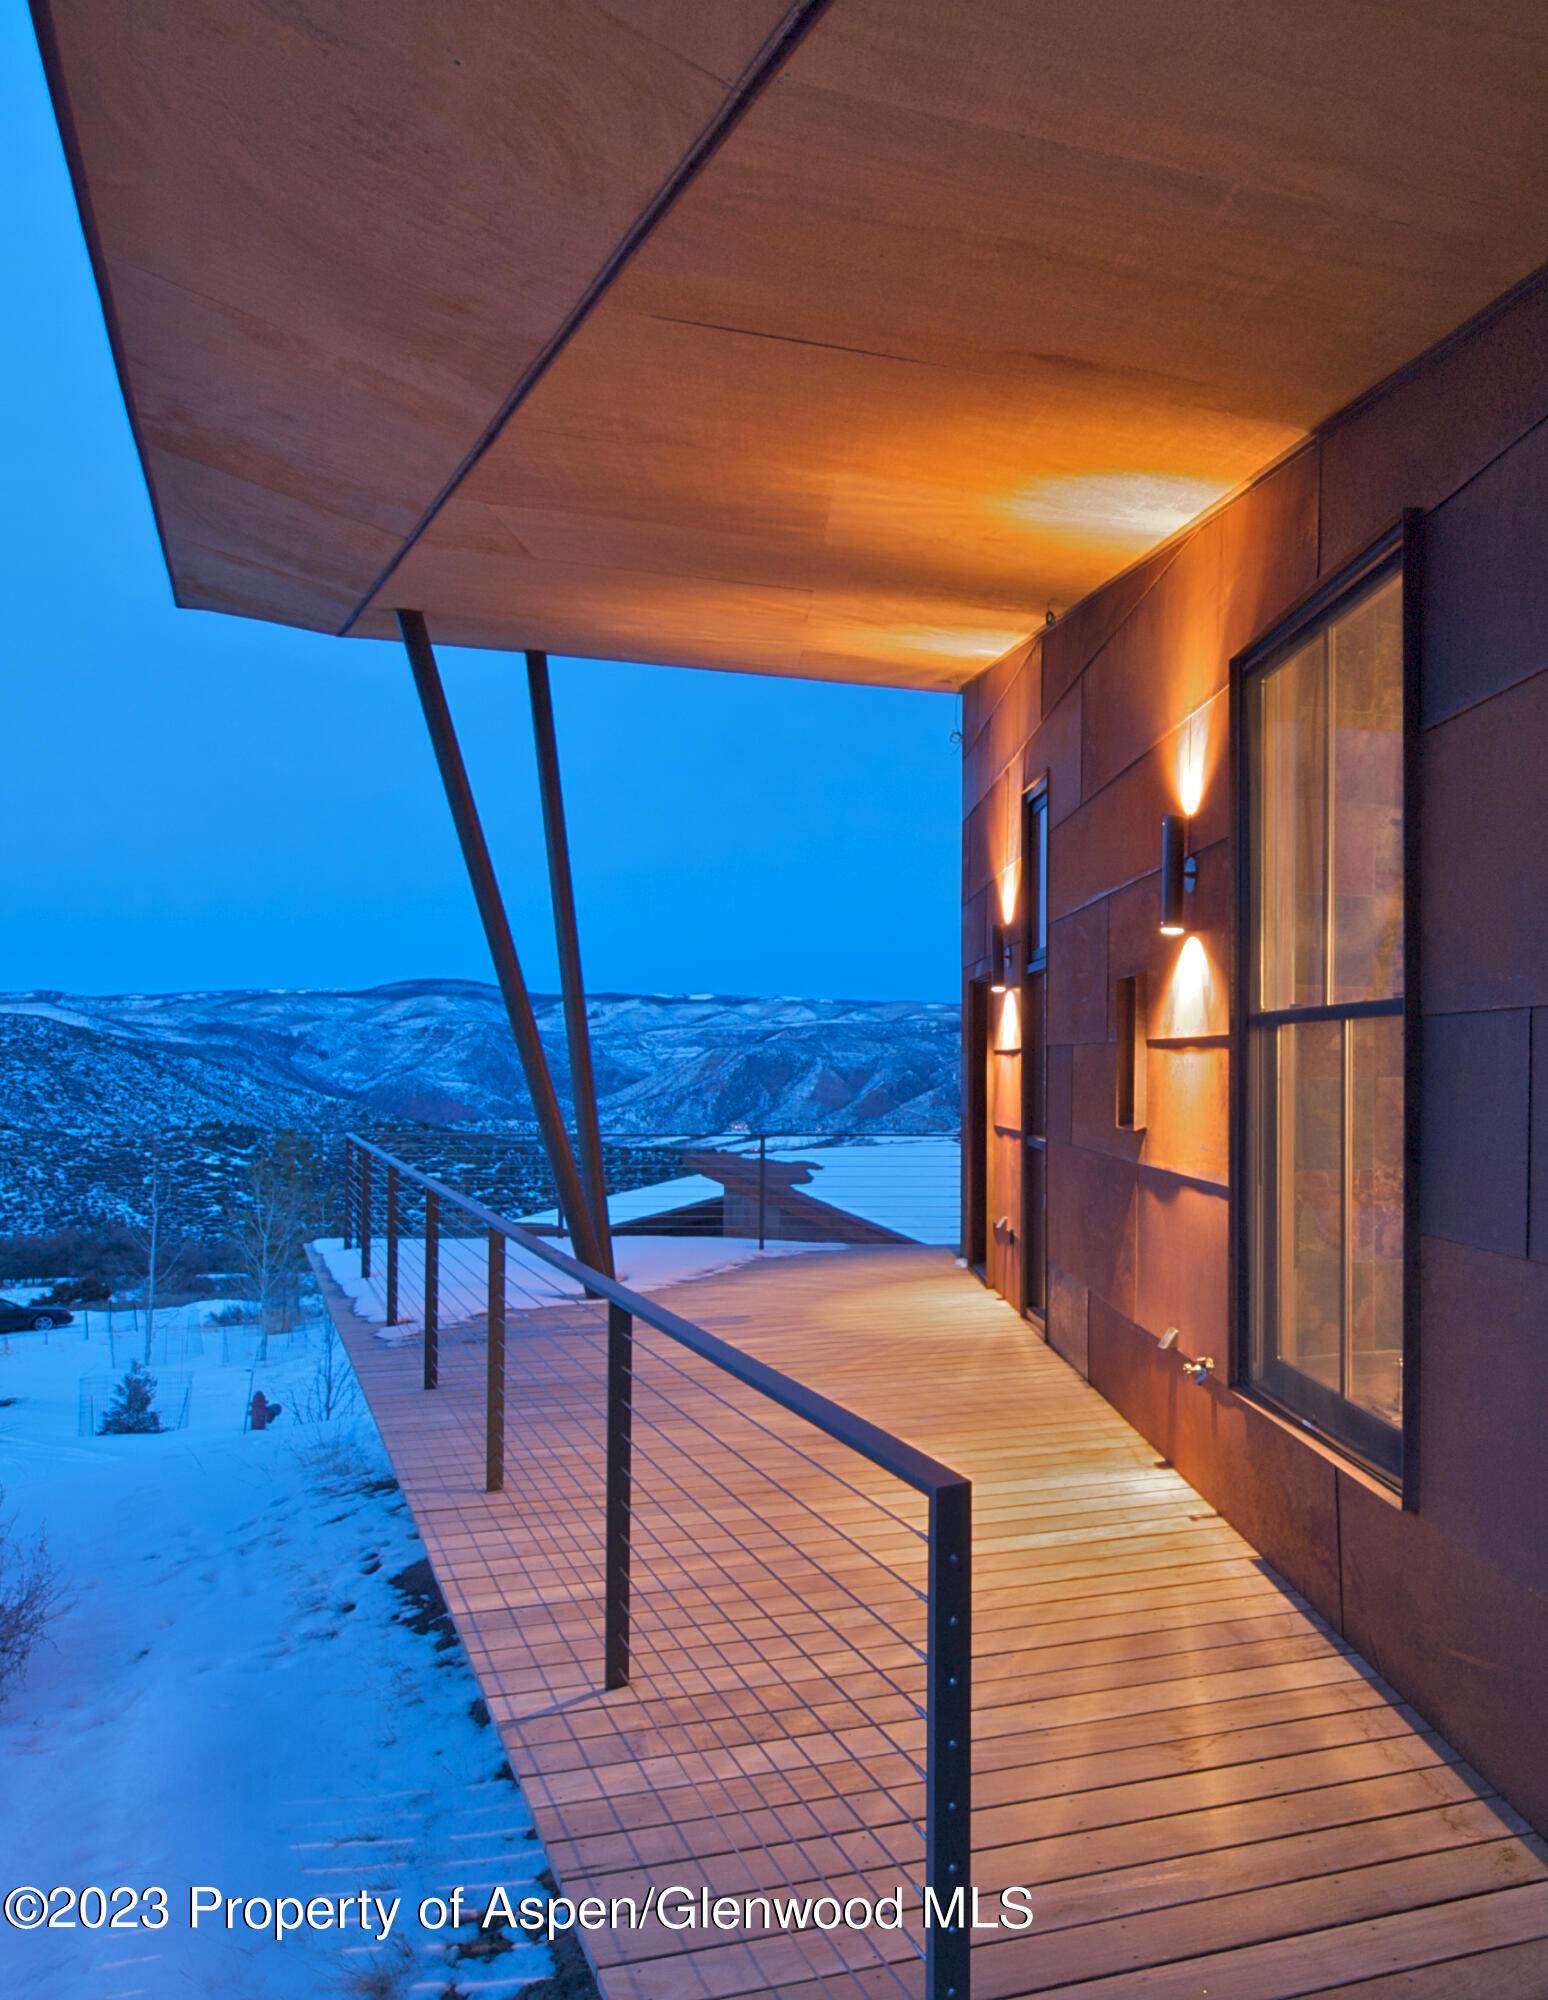 Poised above the scenic allure of Aspen Snowmass, this award winning gem by architect Glen Rappaport graces 35 acres.